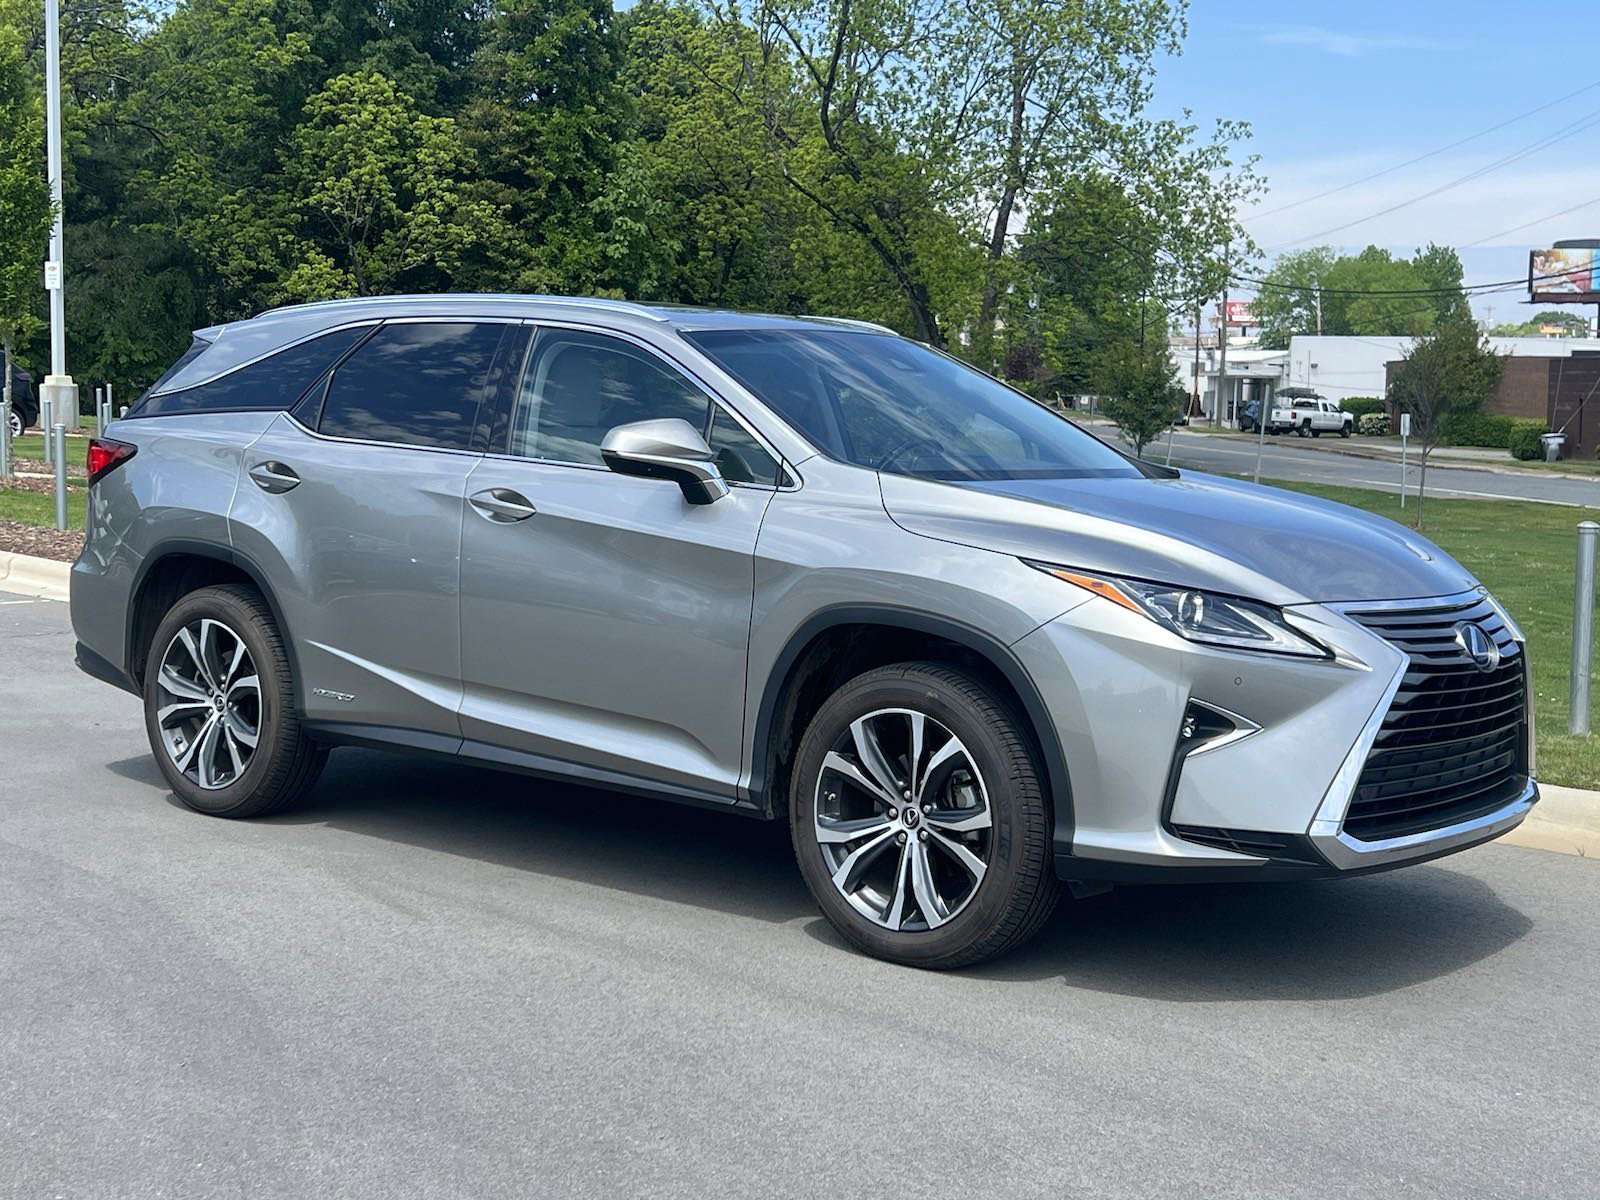 Used 2018 Lexus RX 450hL for Sale Right Now - Autotrader